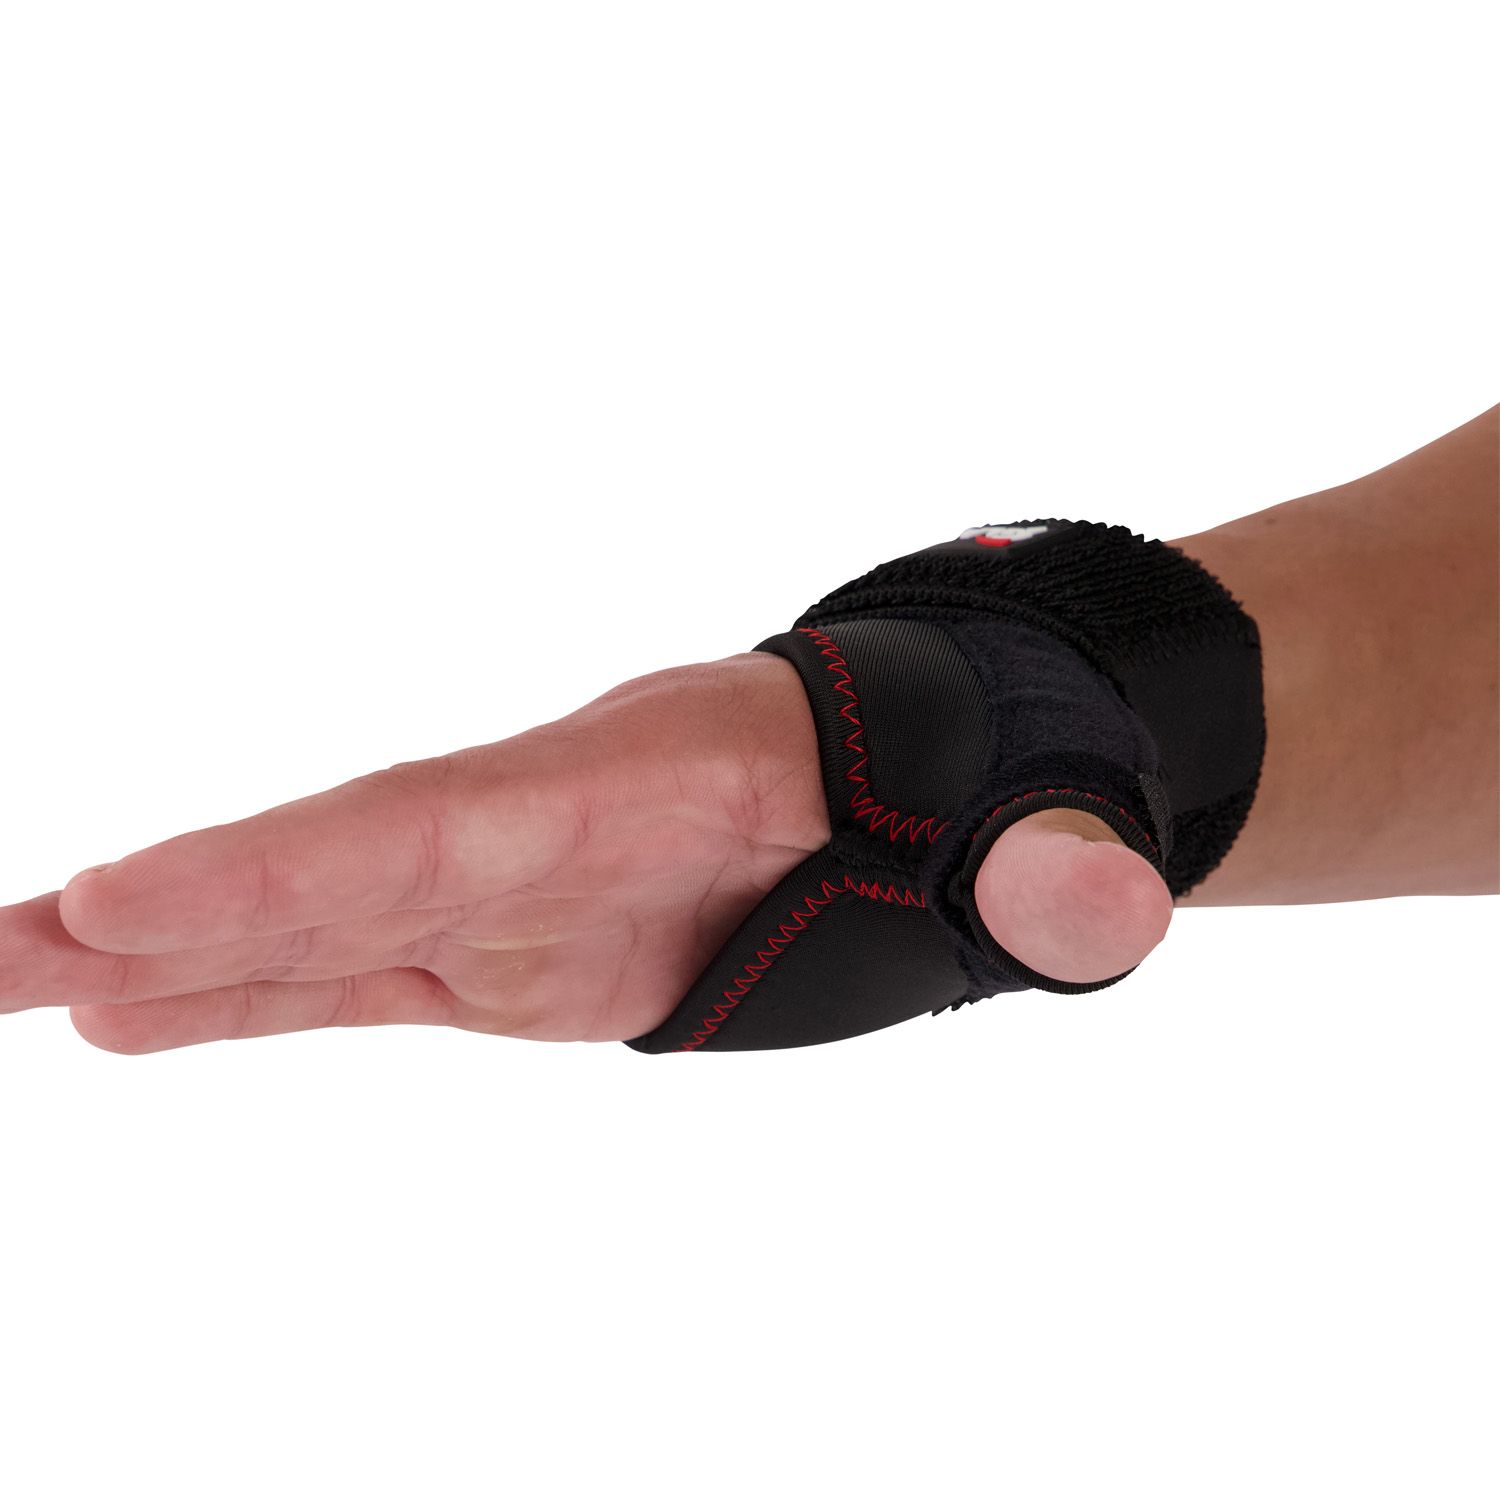 gladiator sports thumb wrist support worn on right hand